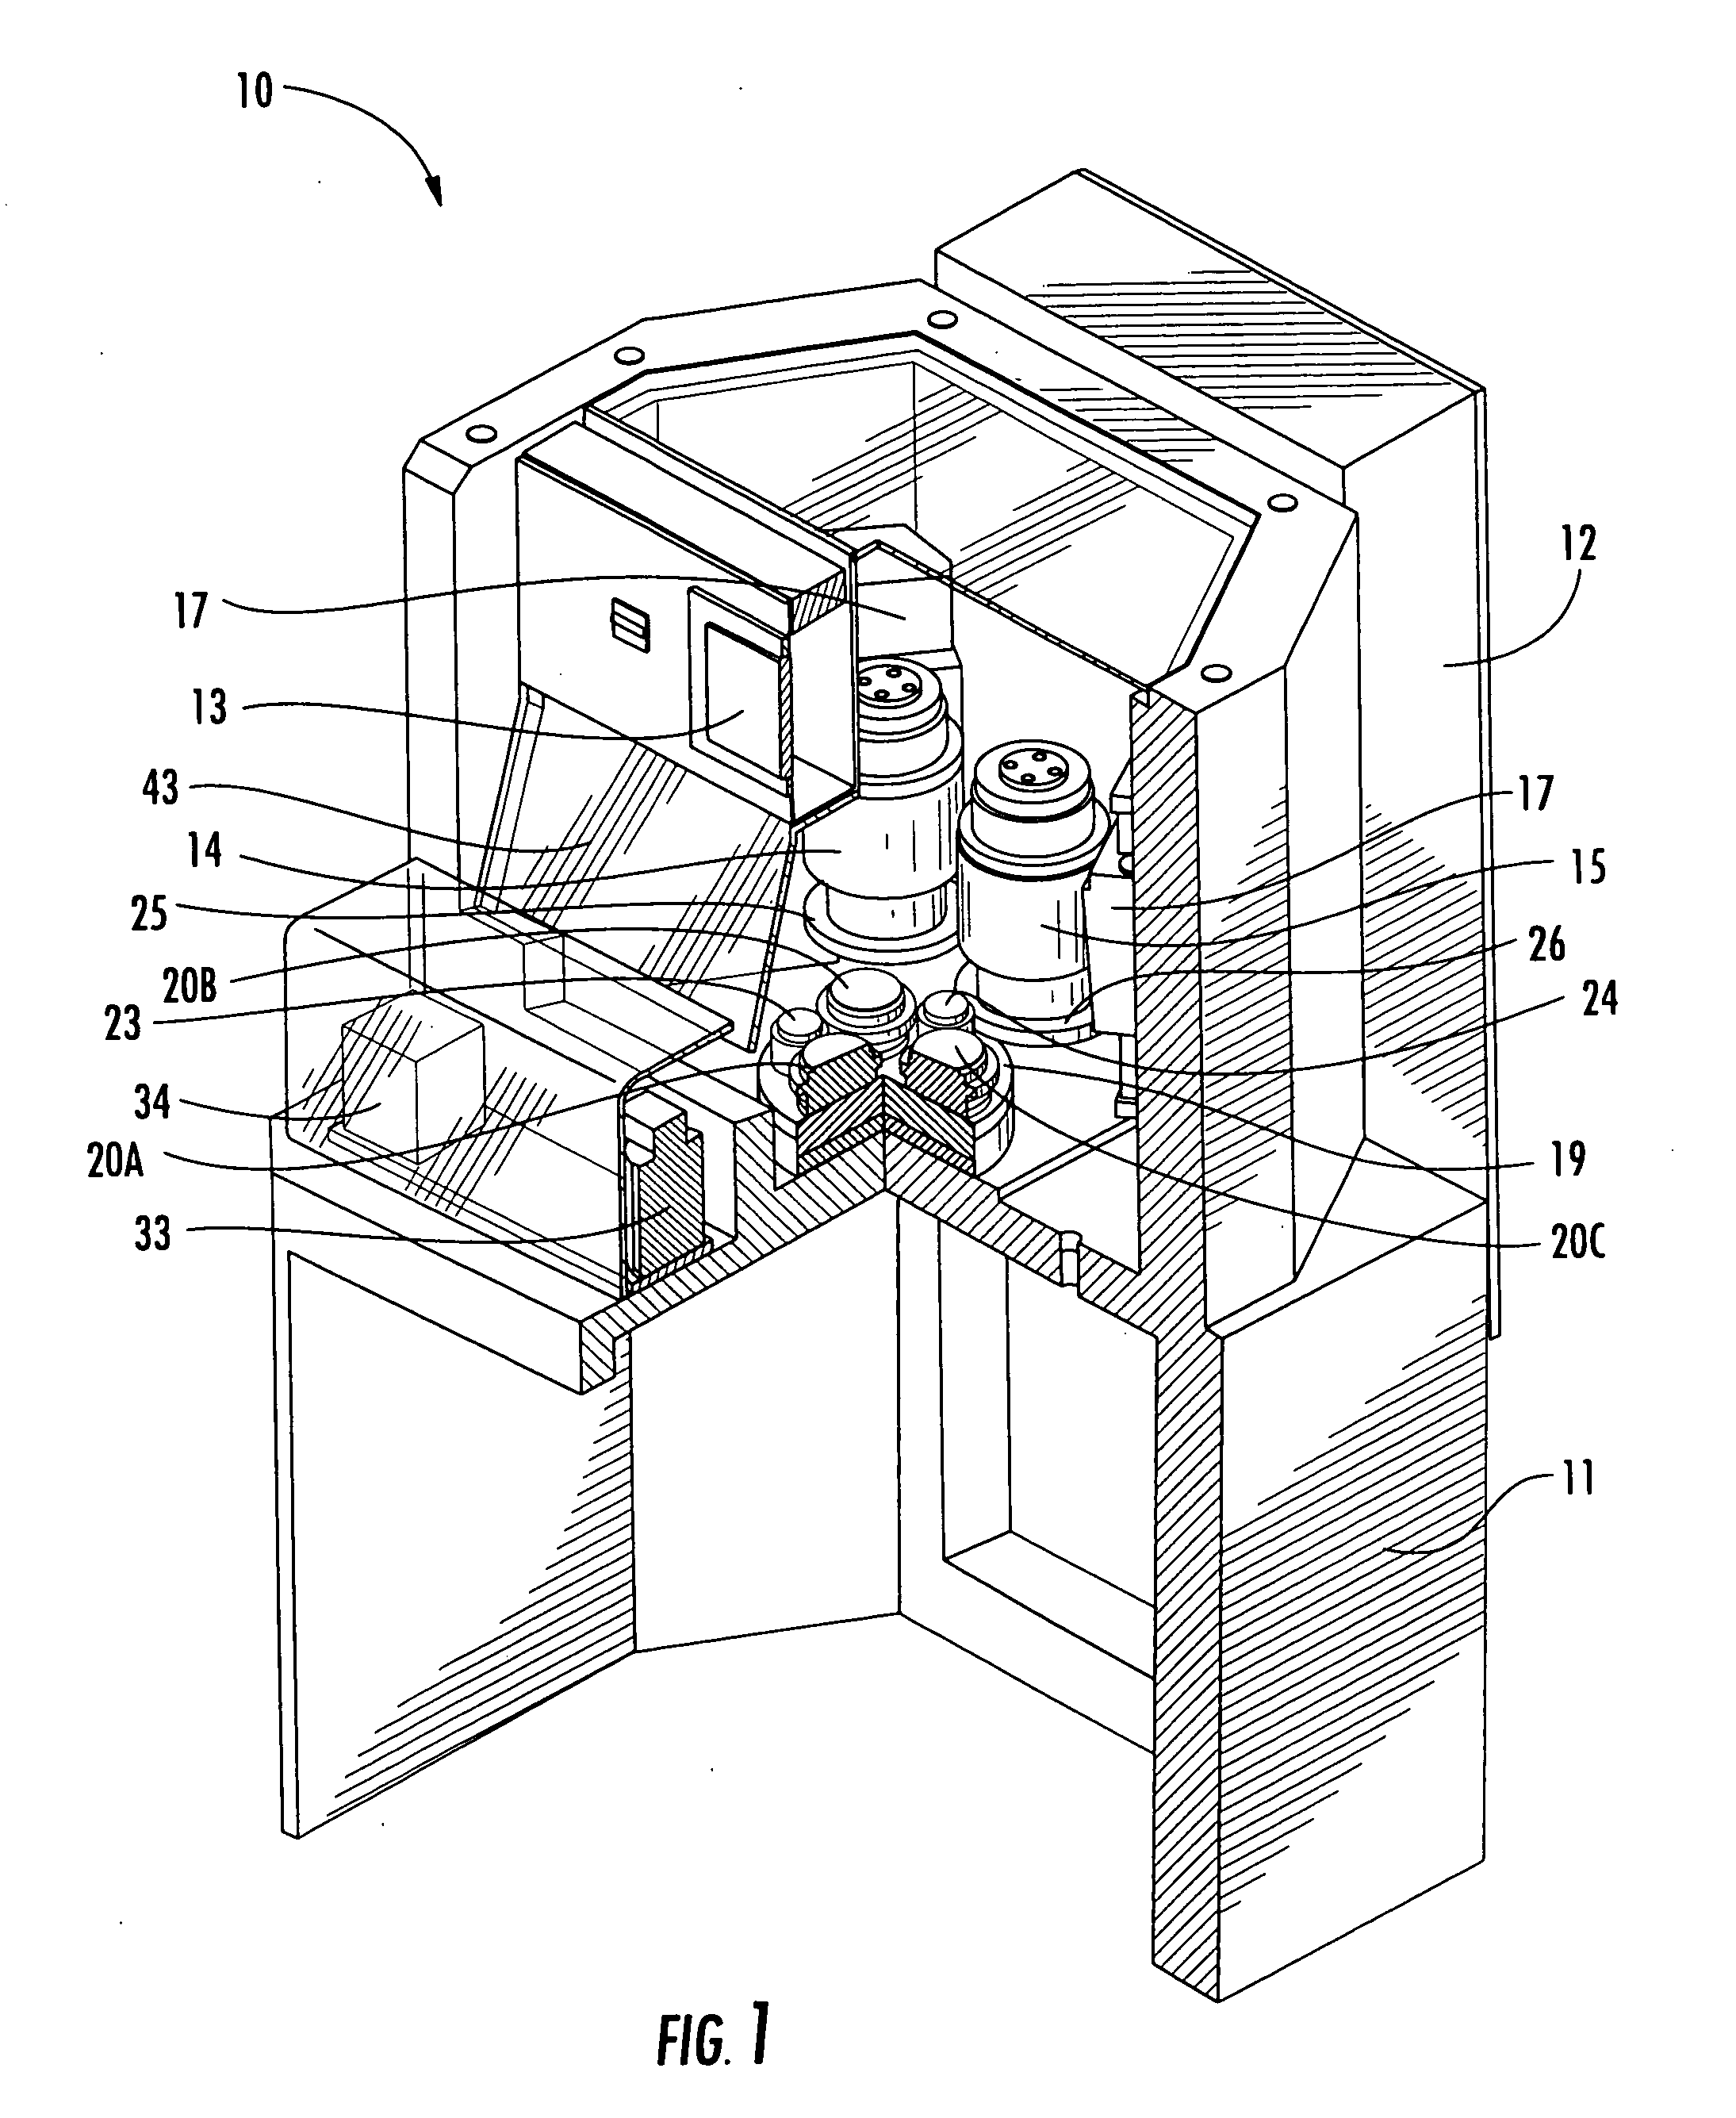 Semiconductor wafer grinder